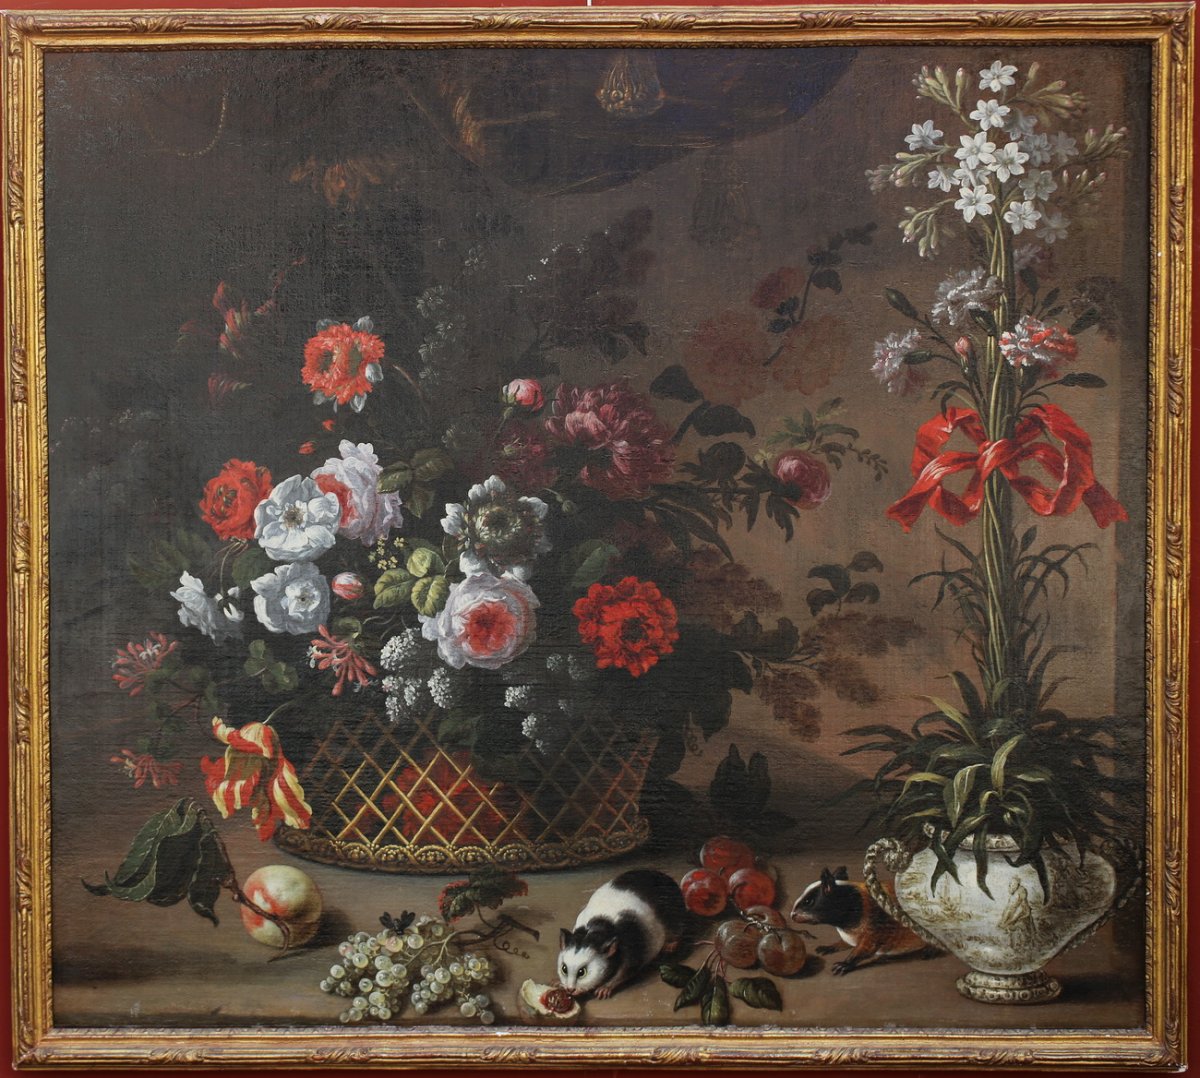 Pierre Nicolas Huilliot 1674-1751 Attributed To, Still Life With Flowers And Guinea Pigs.